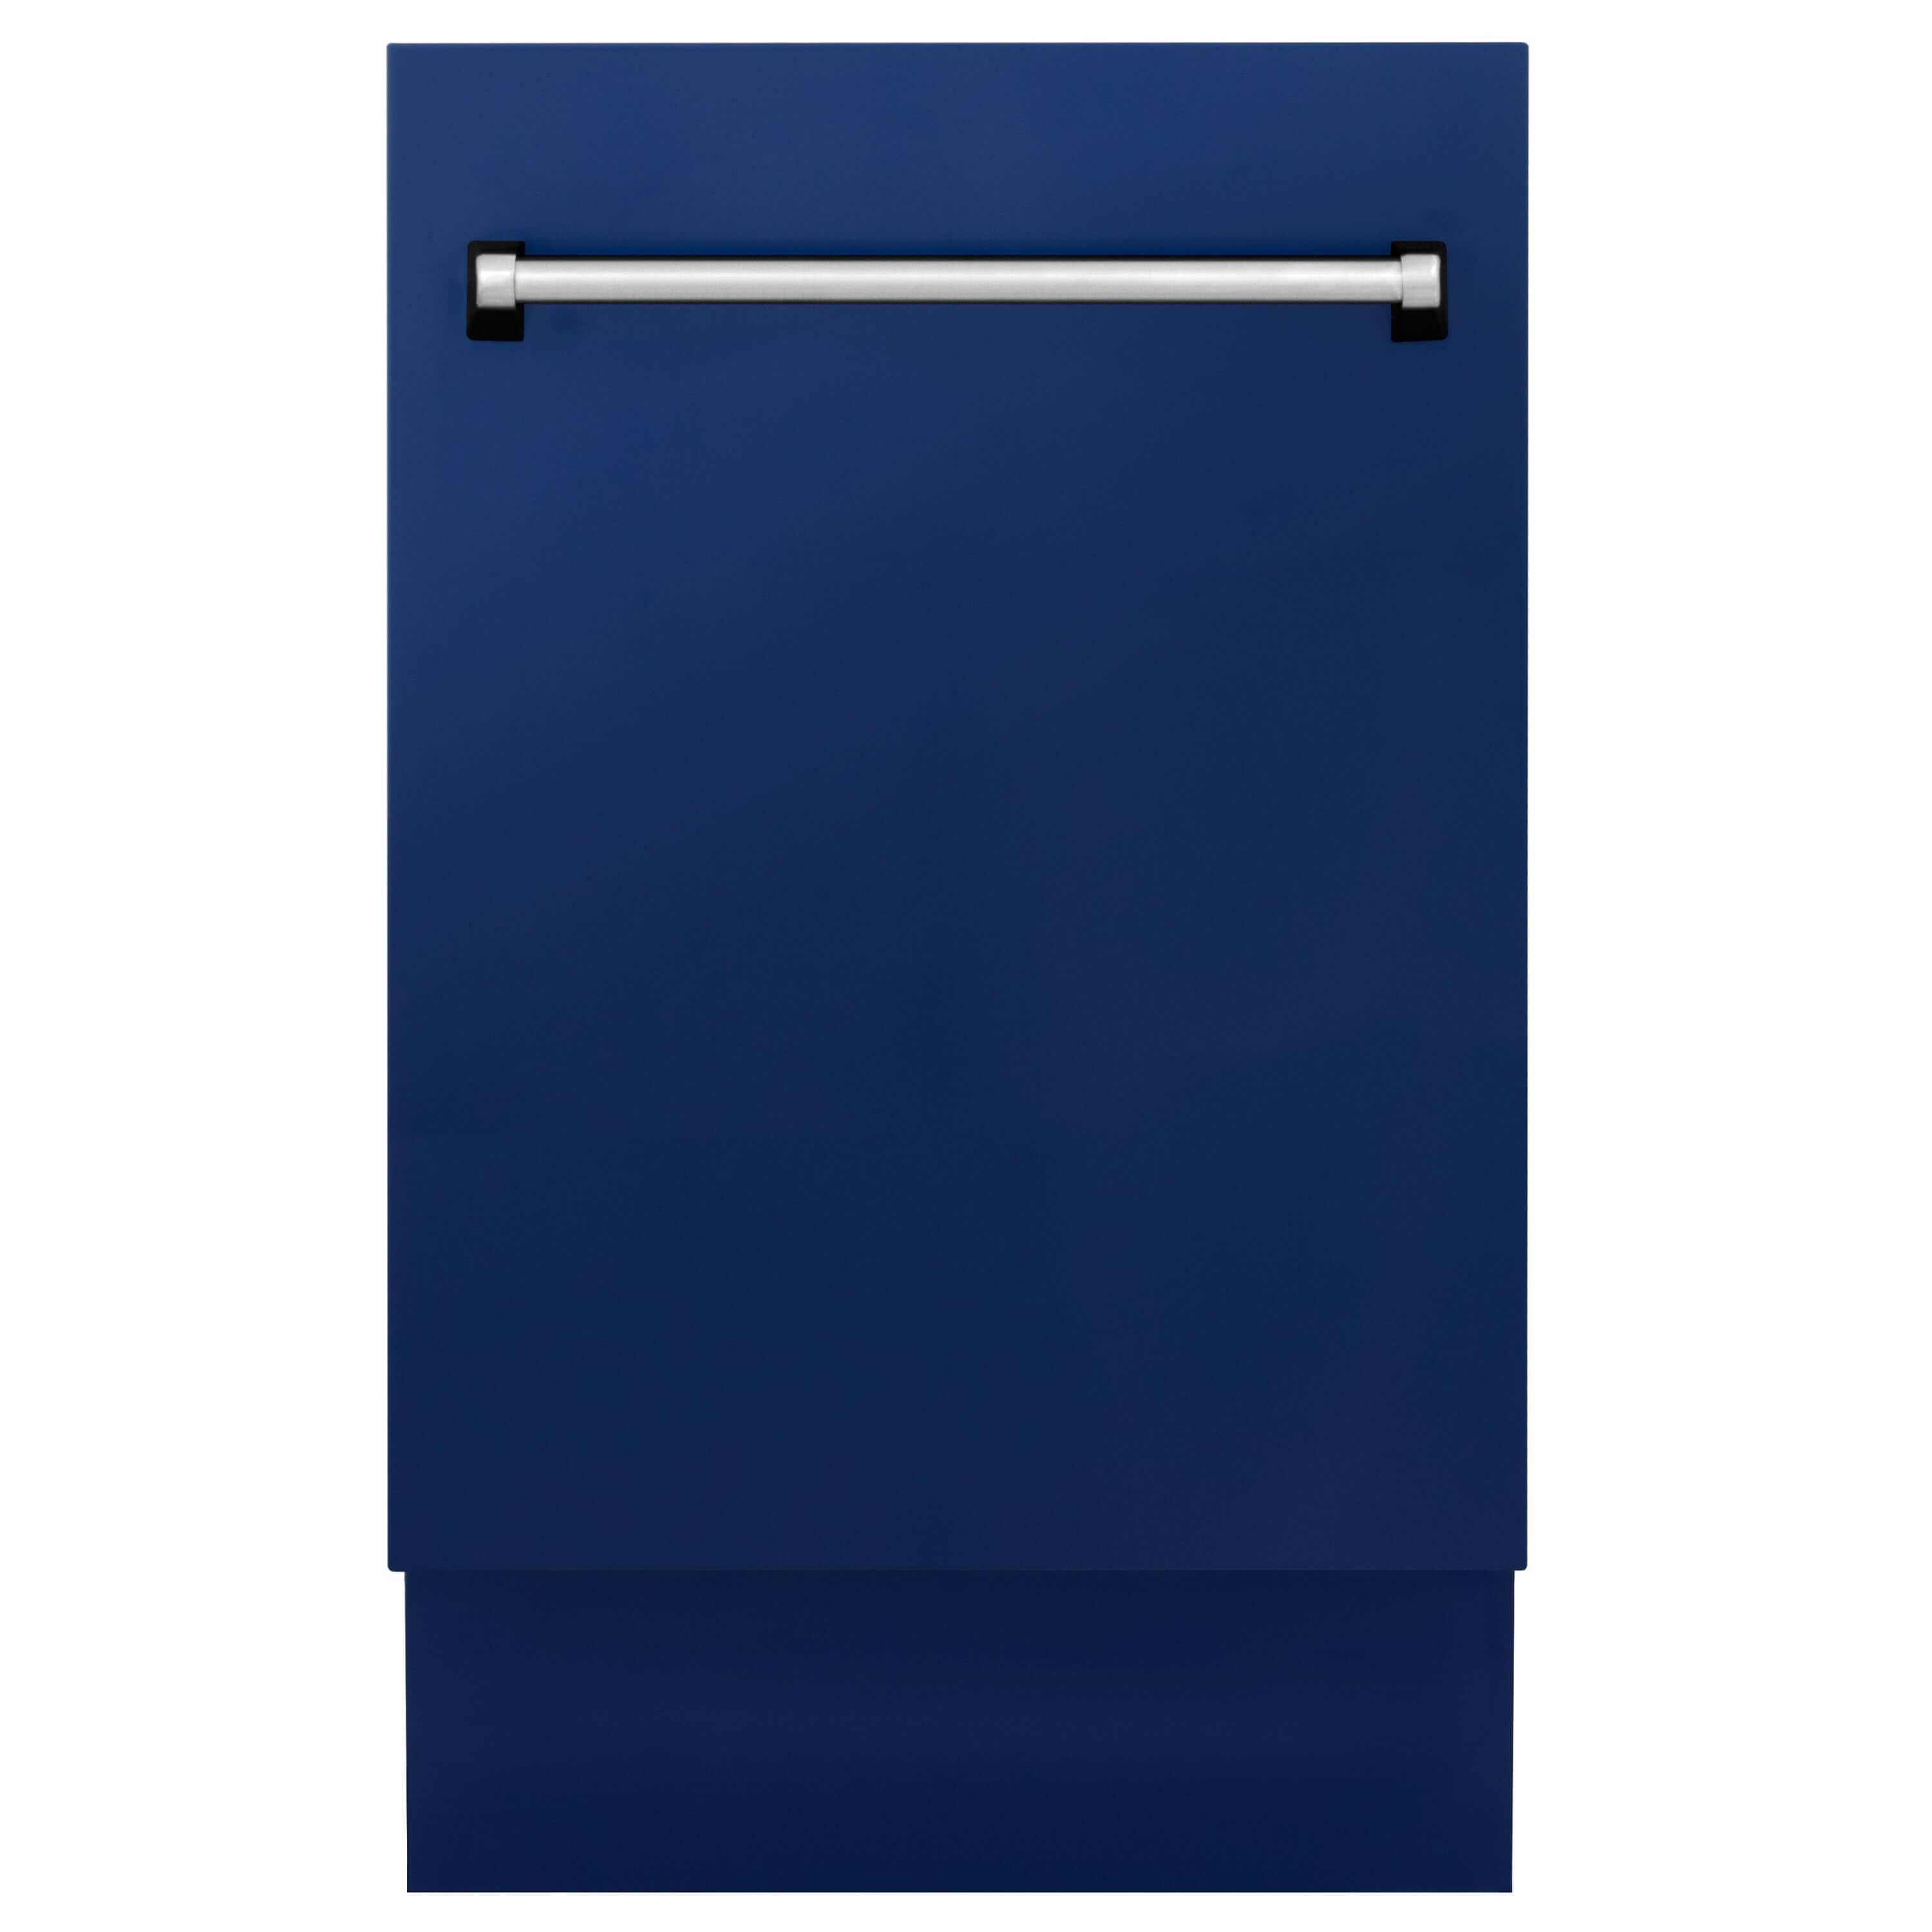 ZLINE 18 in. Tallac Series 3rd Rack Top Control Built-In Dishwasher in Blue Gloss with Stainless Steel Tub, 51dBa (DWV-BG-18) front, closed.